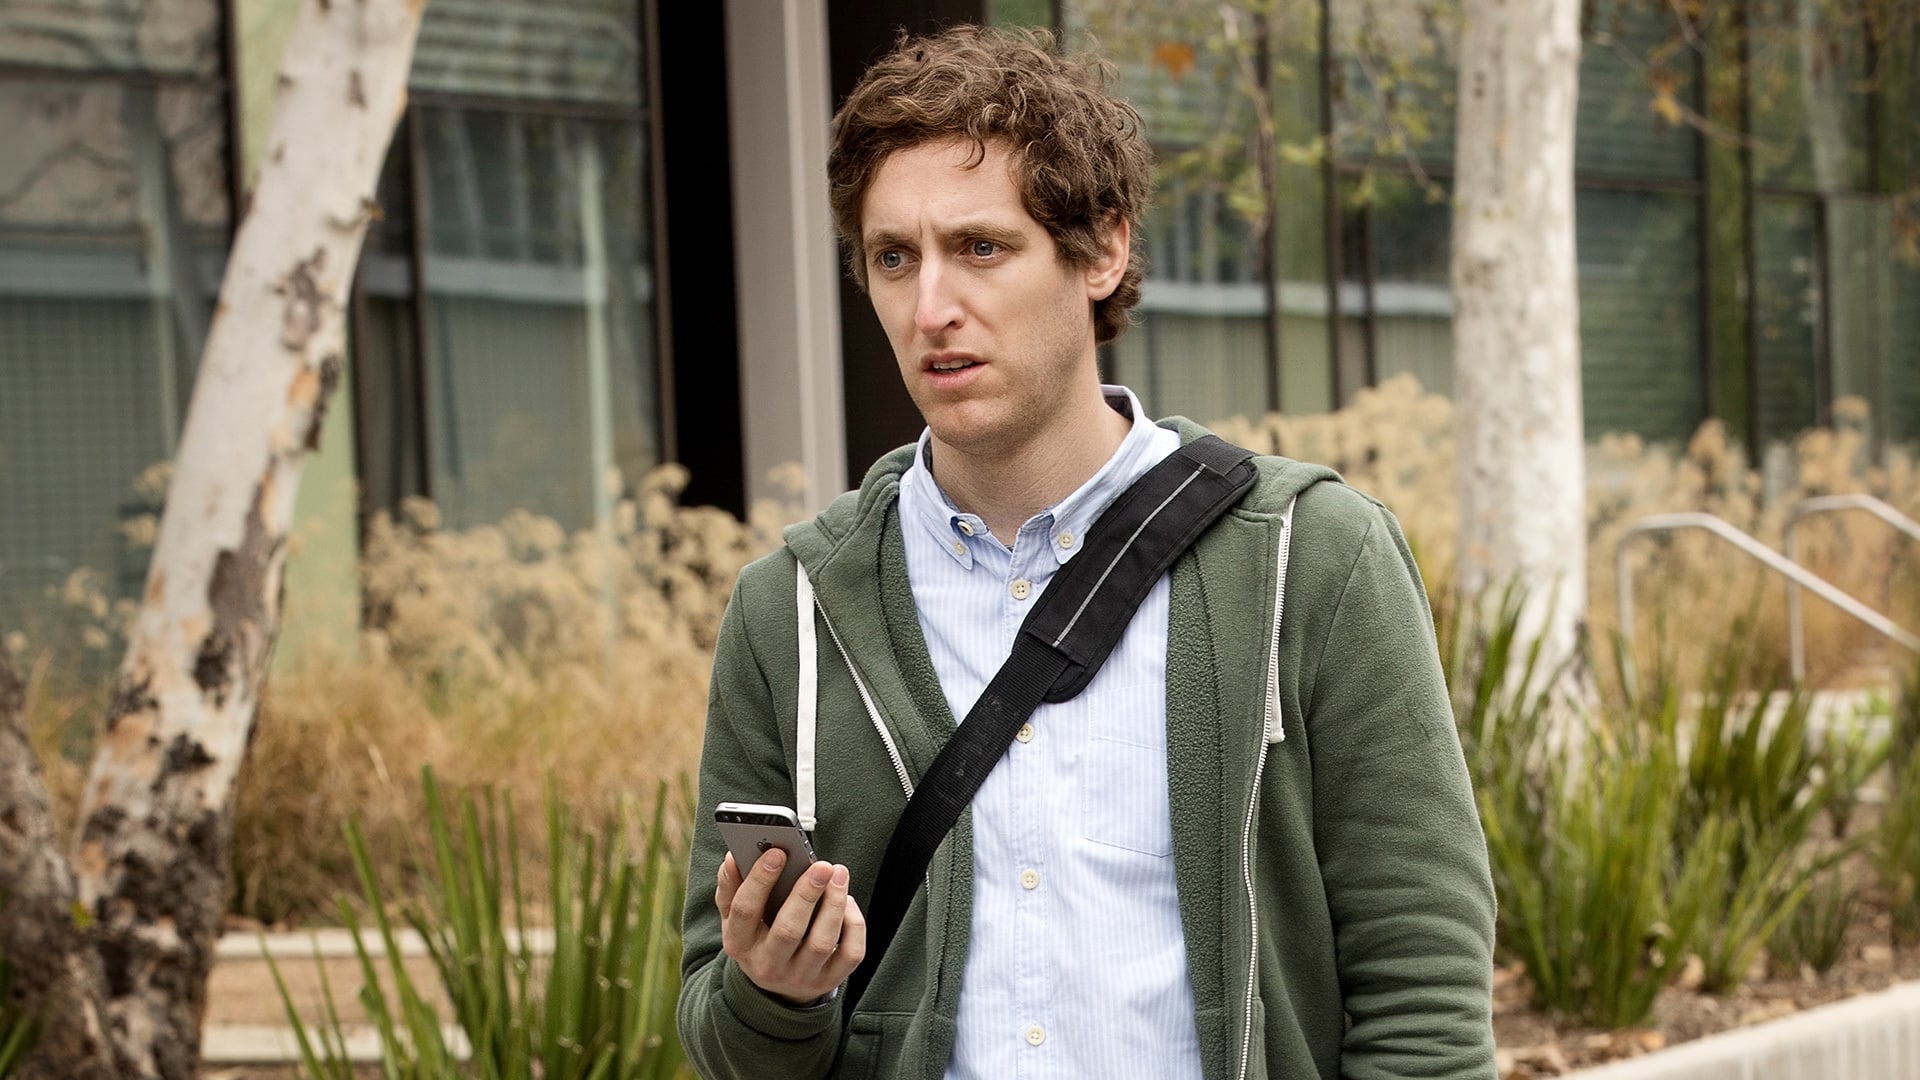 Image Silicon Valley (2014) 1